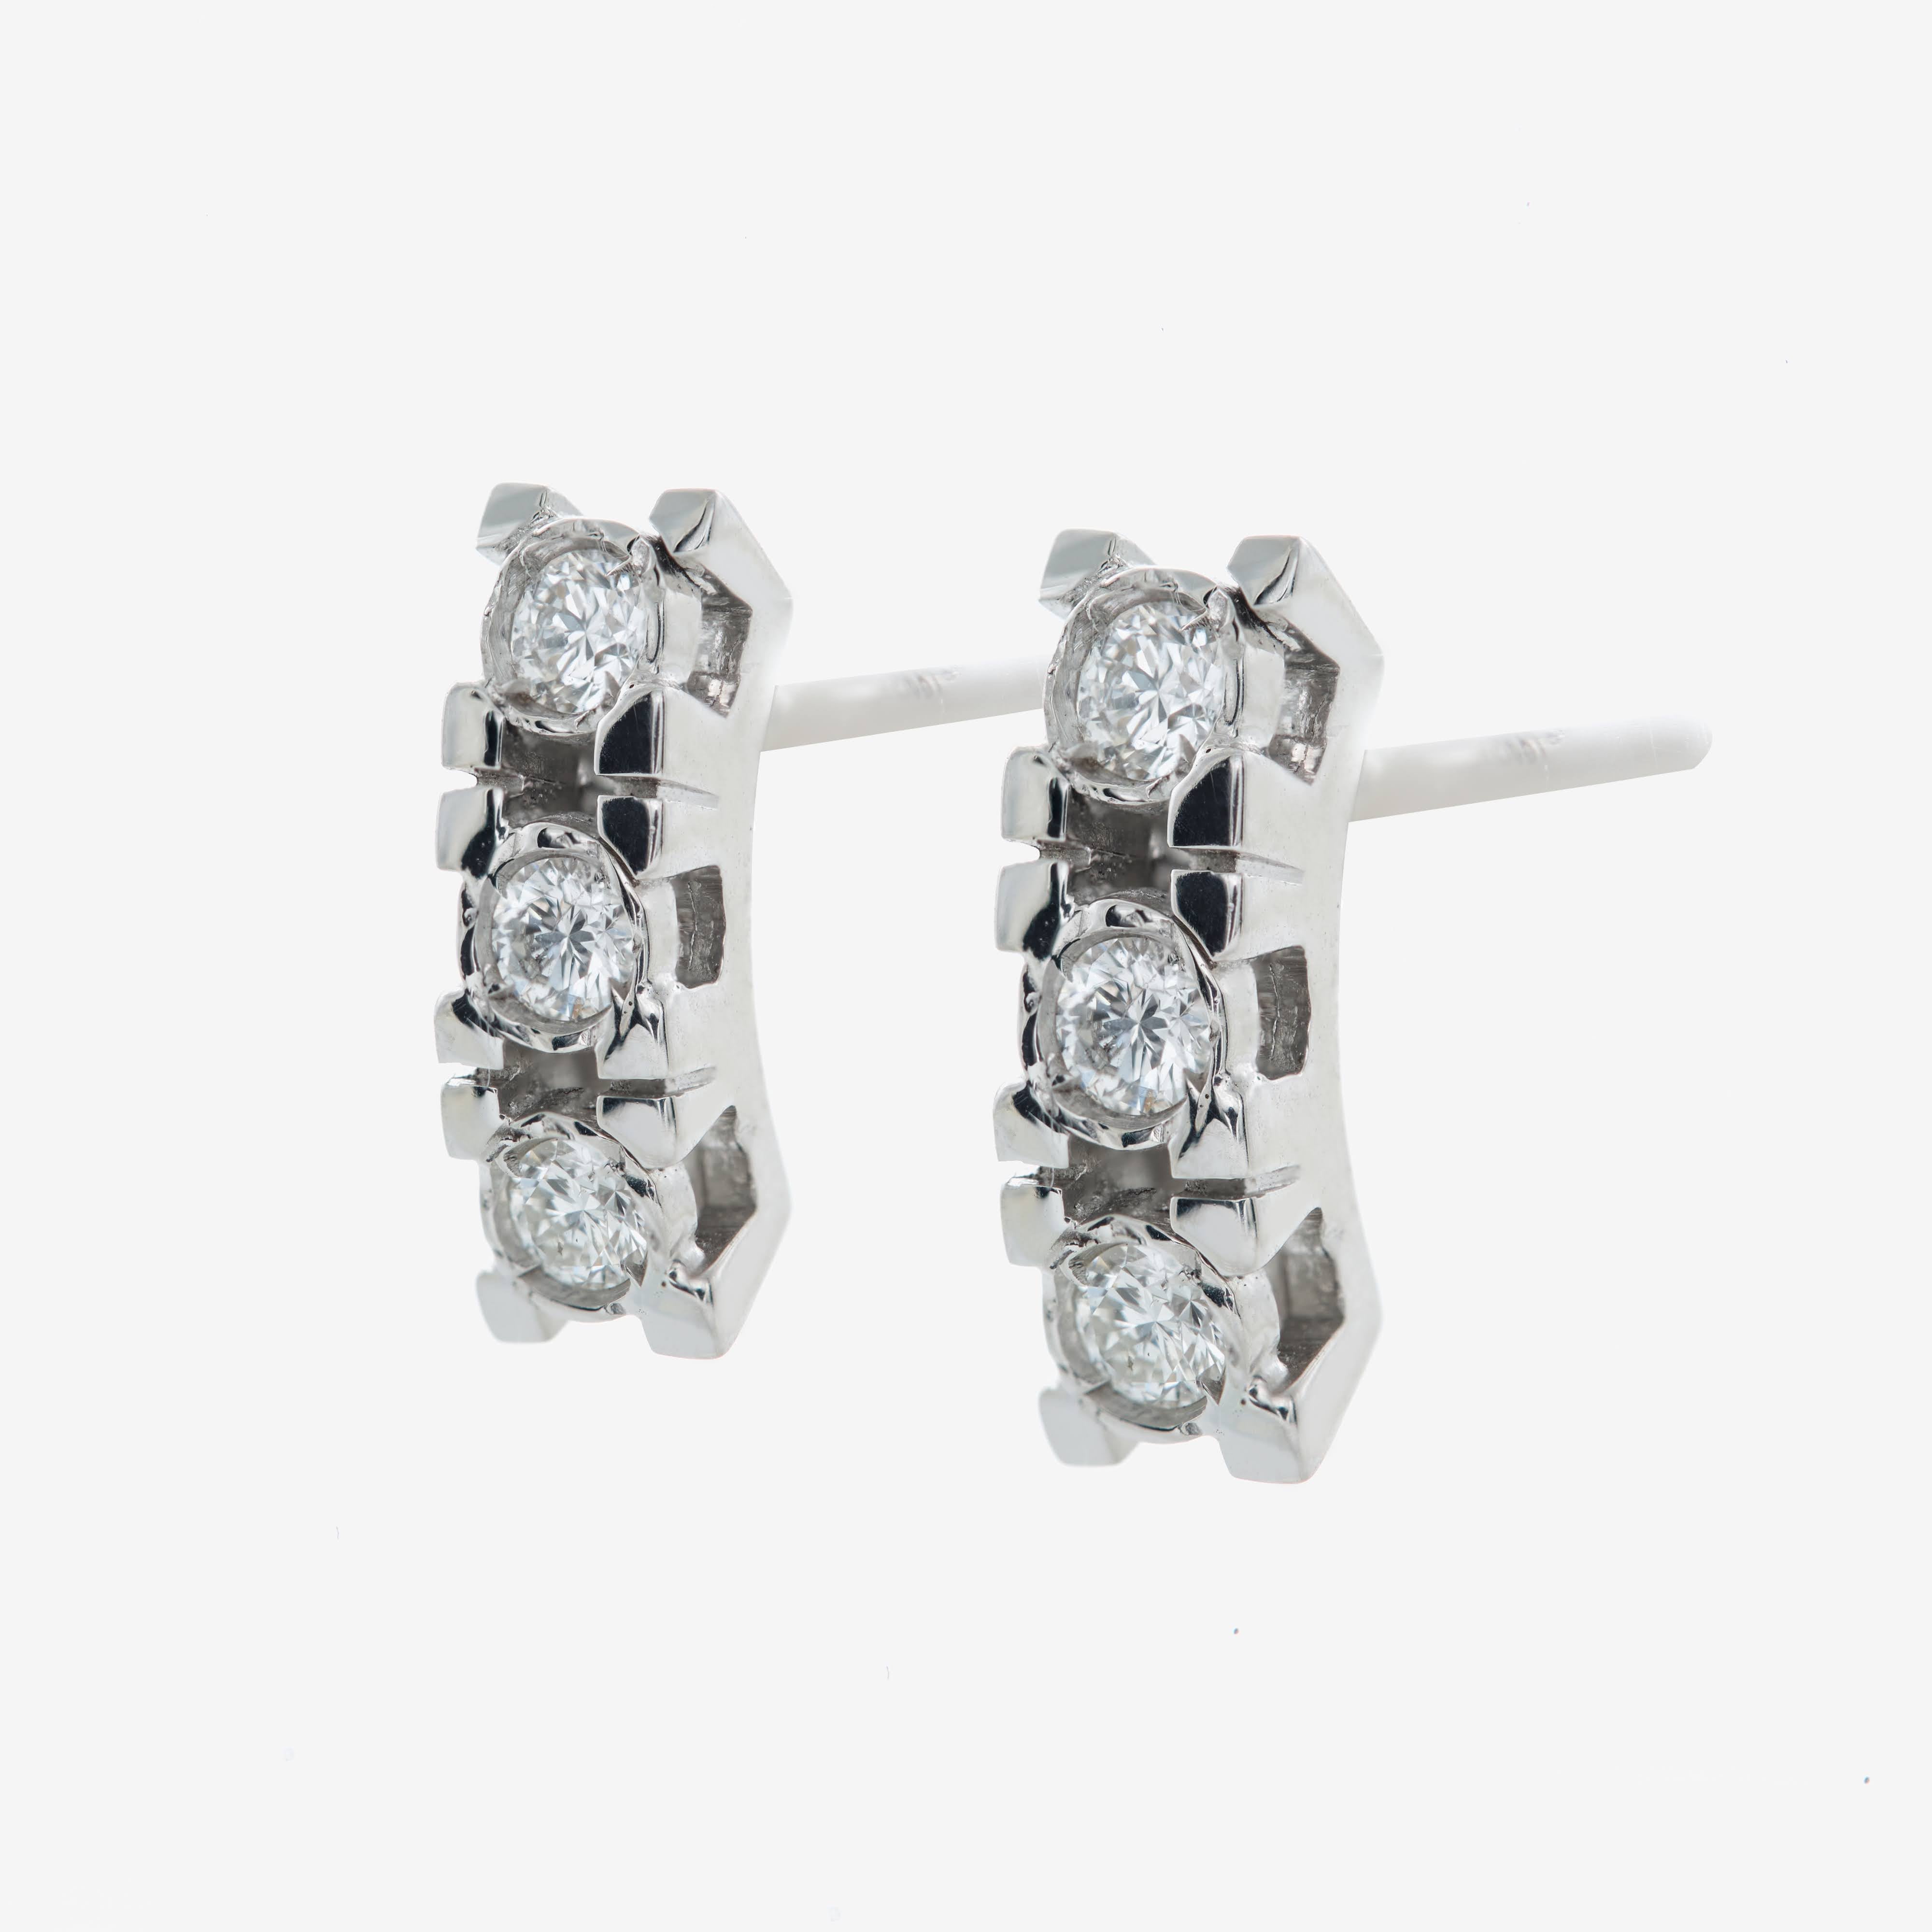 Smooth trio earrings with diamonds